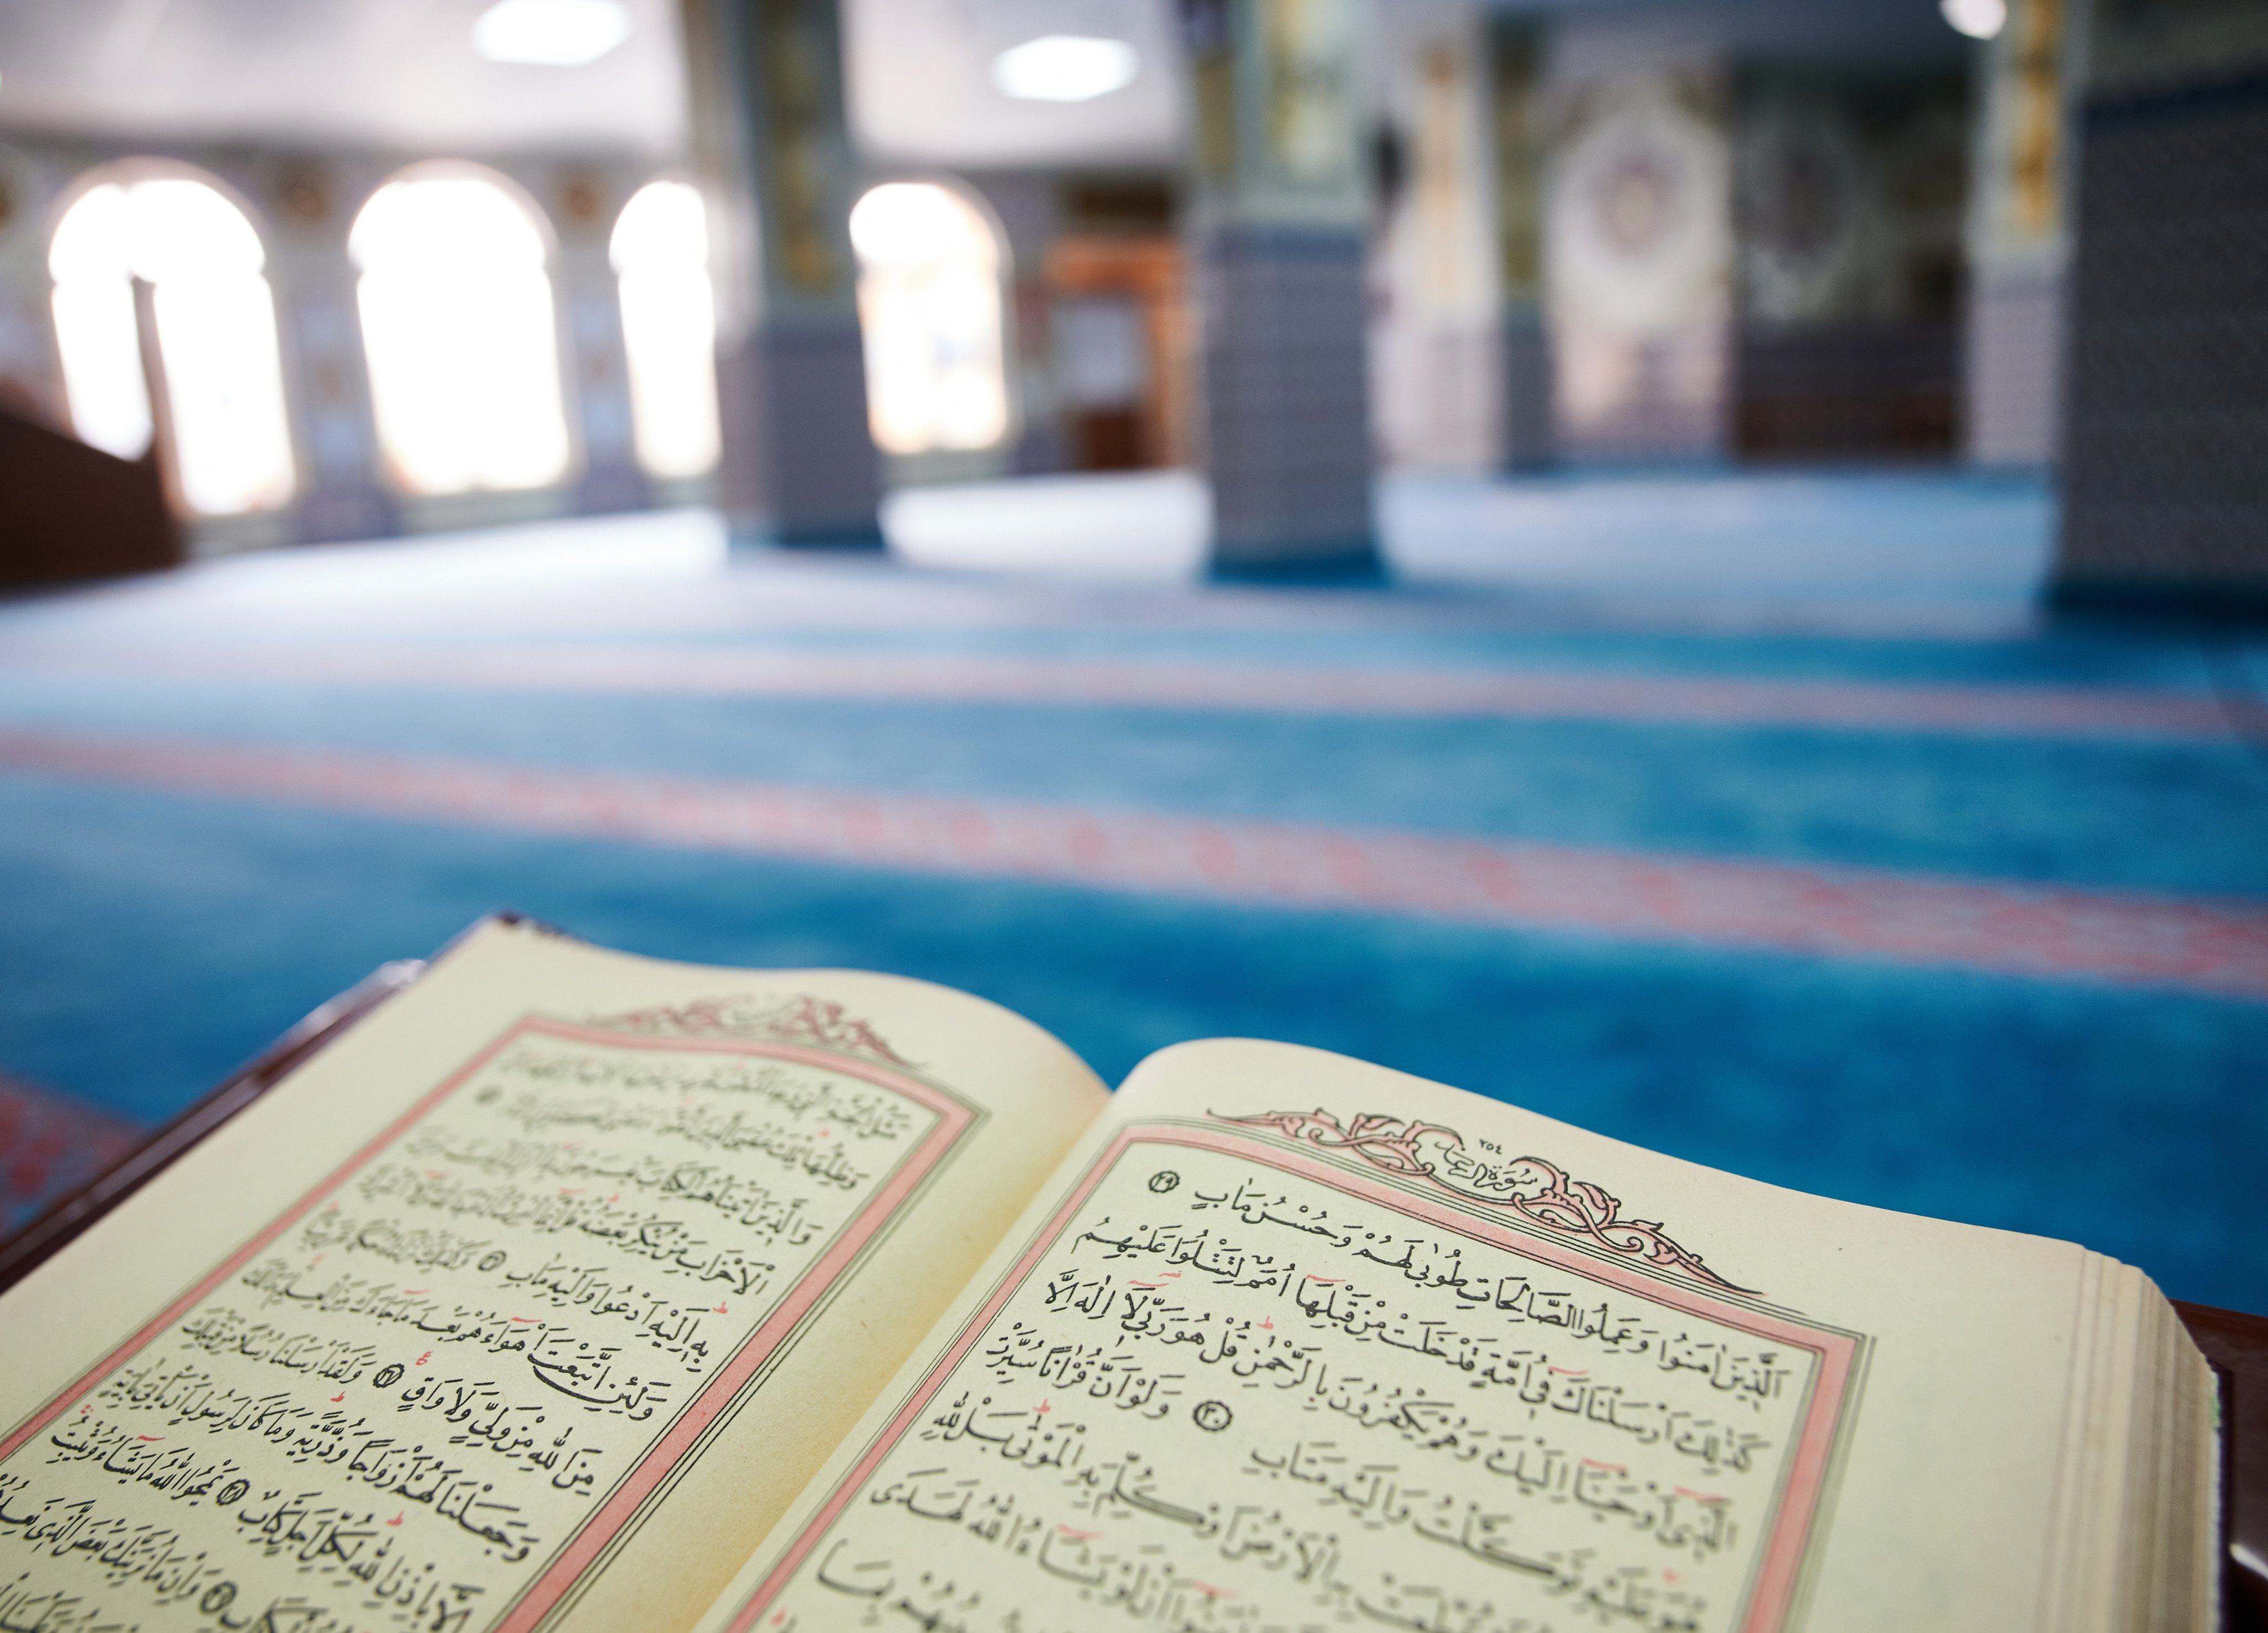 Denmark is proposing legislation that would enable authorities to prevent the burning of copies of the Koran in public. Photo: dpa